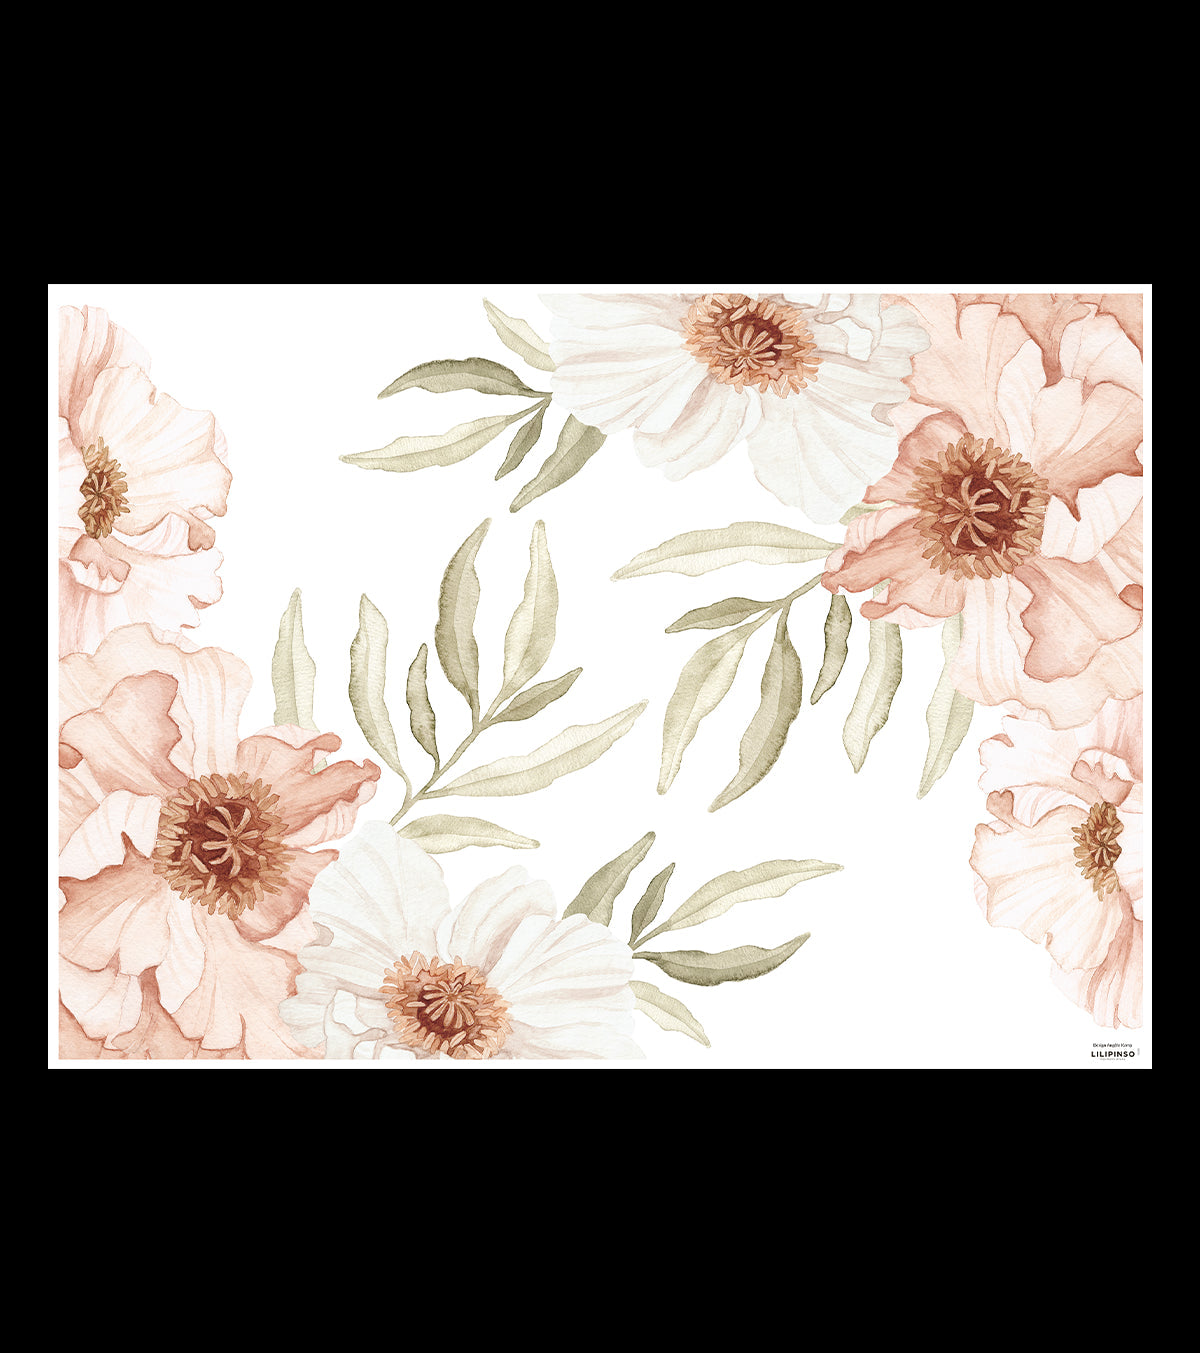 Islandic Poppies - Wall Decals Muraux - Large Bouquets